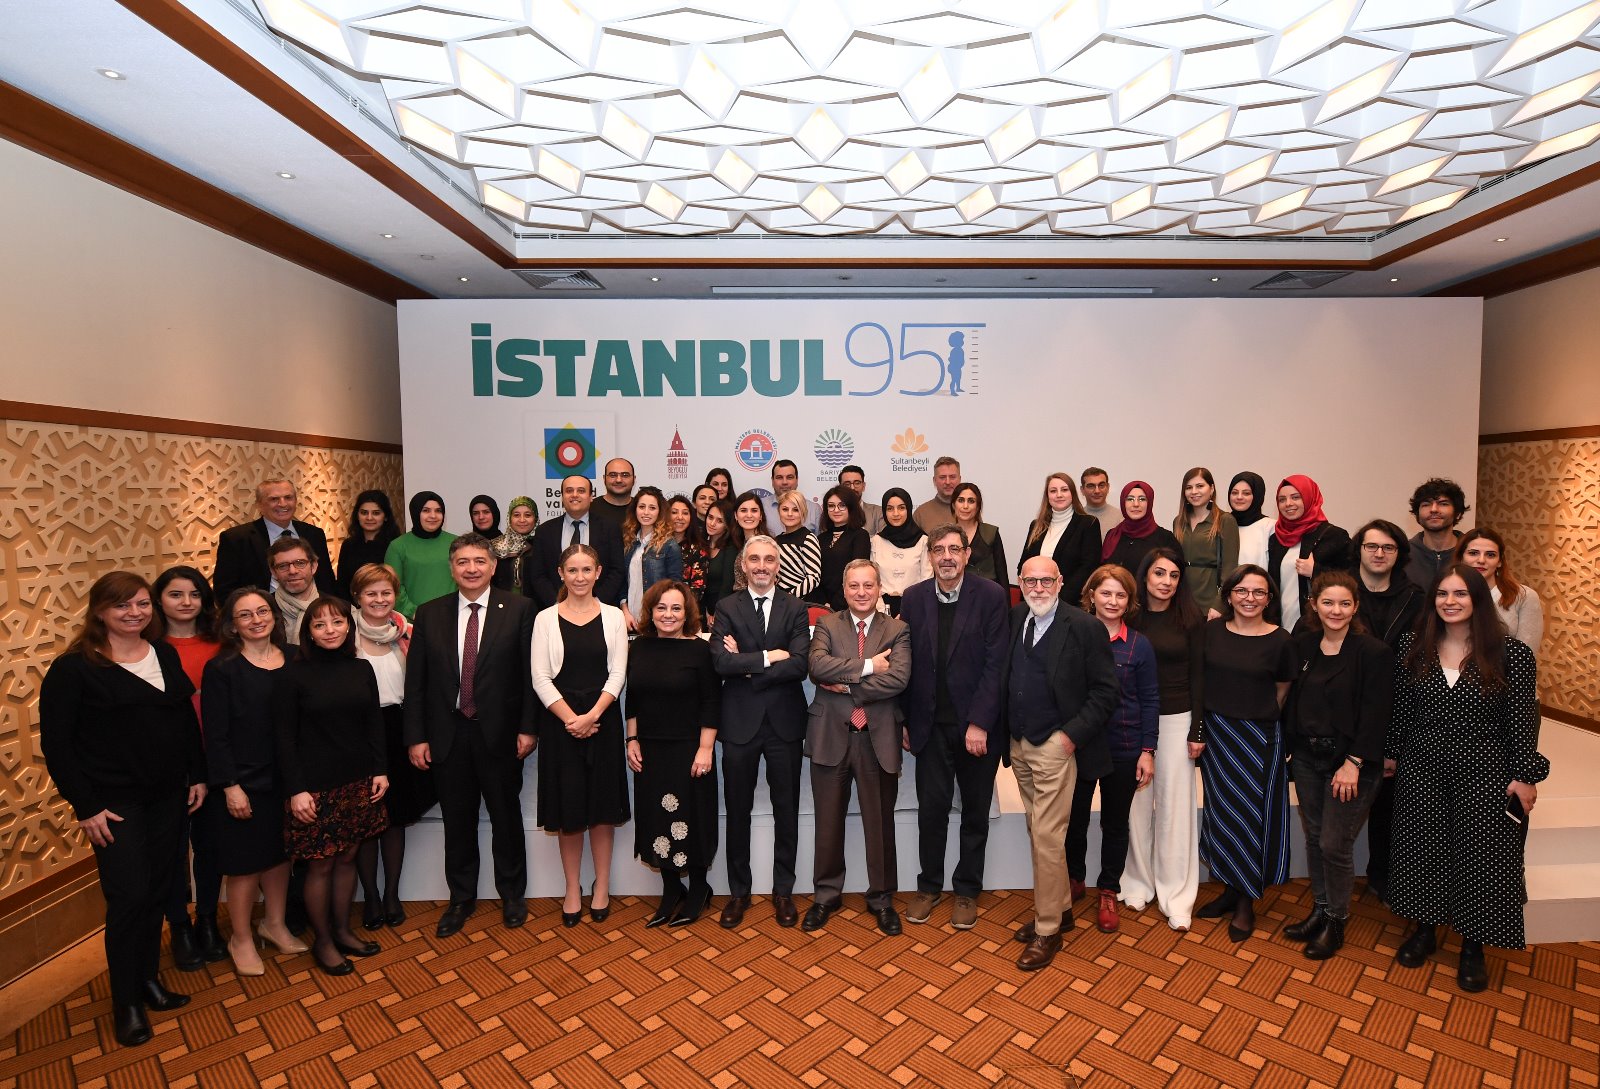 Istanbul95 partners